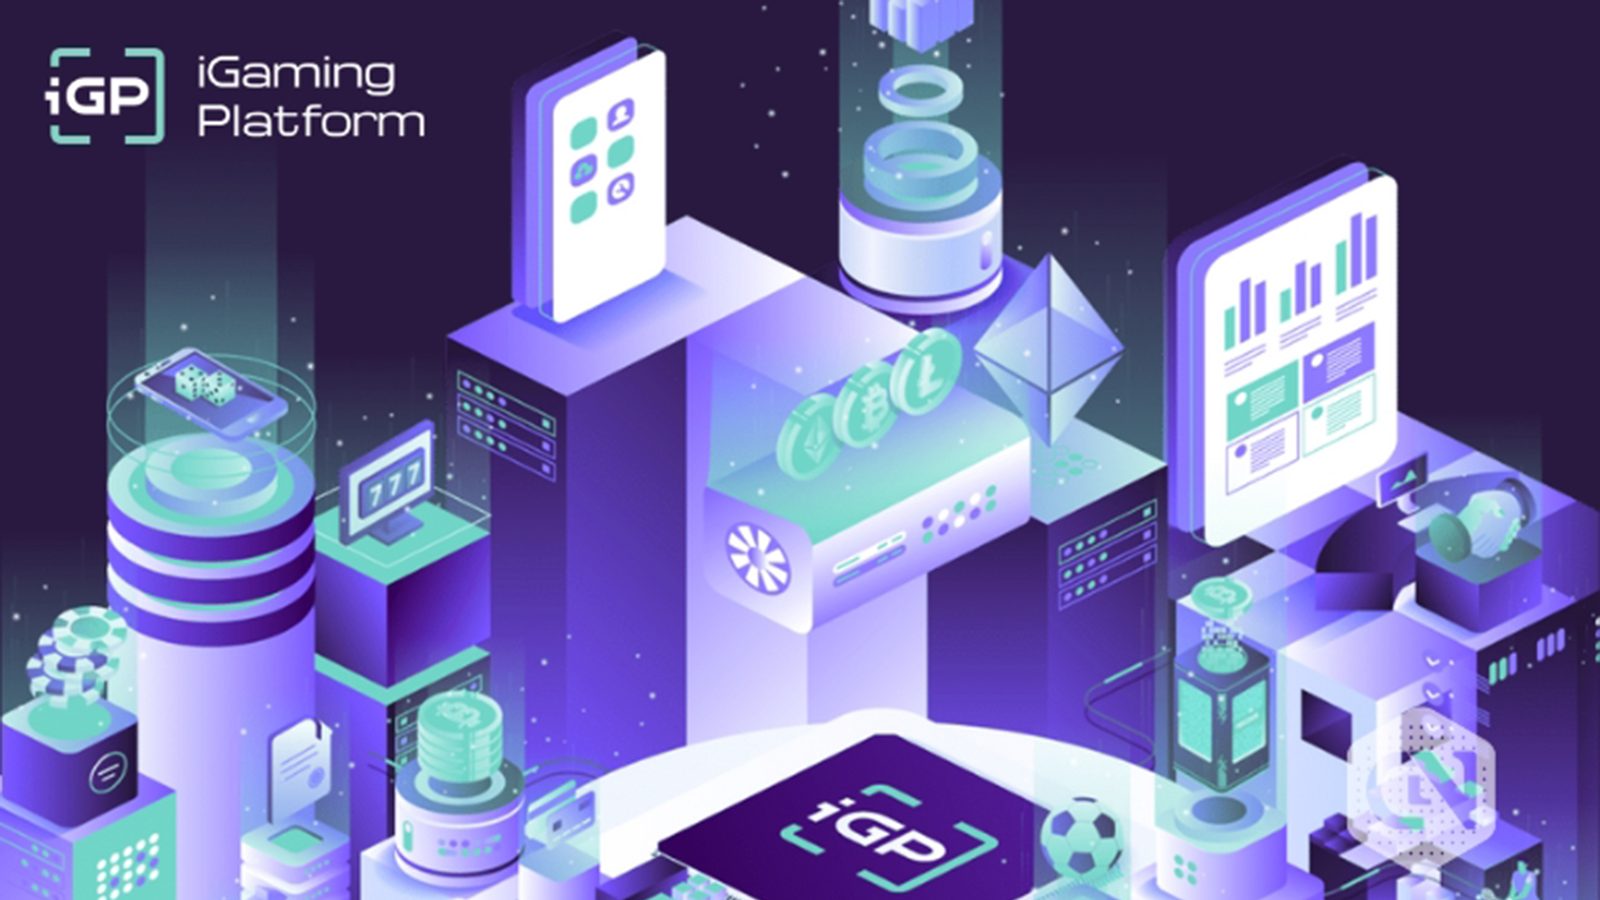 iGaming Platform and Logifuture Join Forces